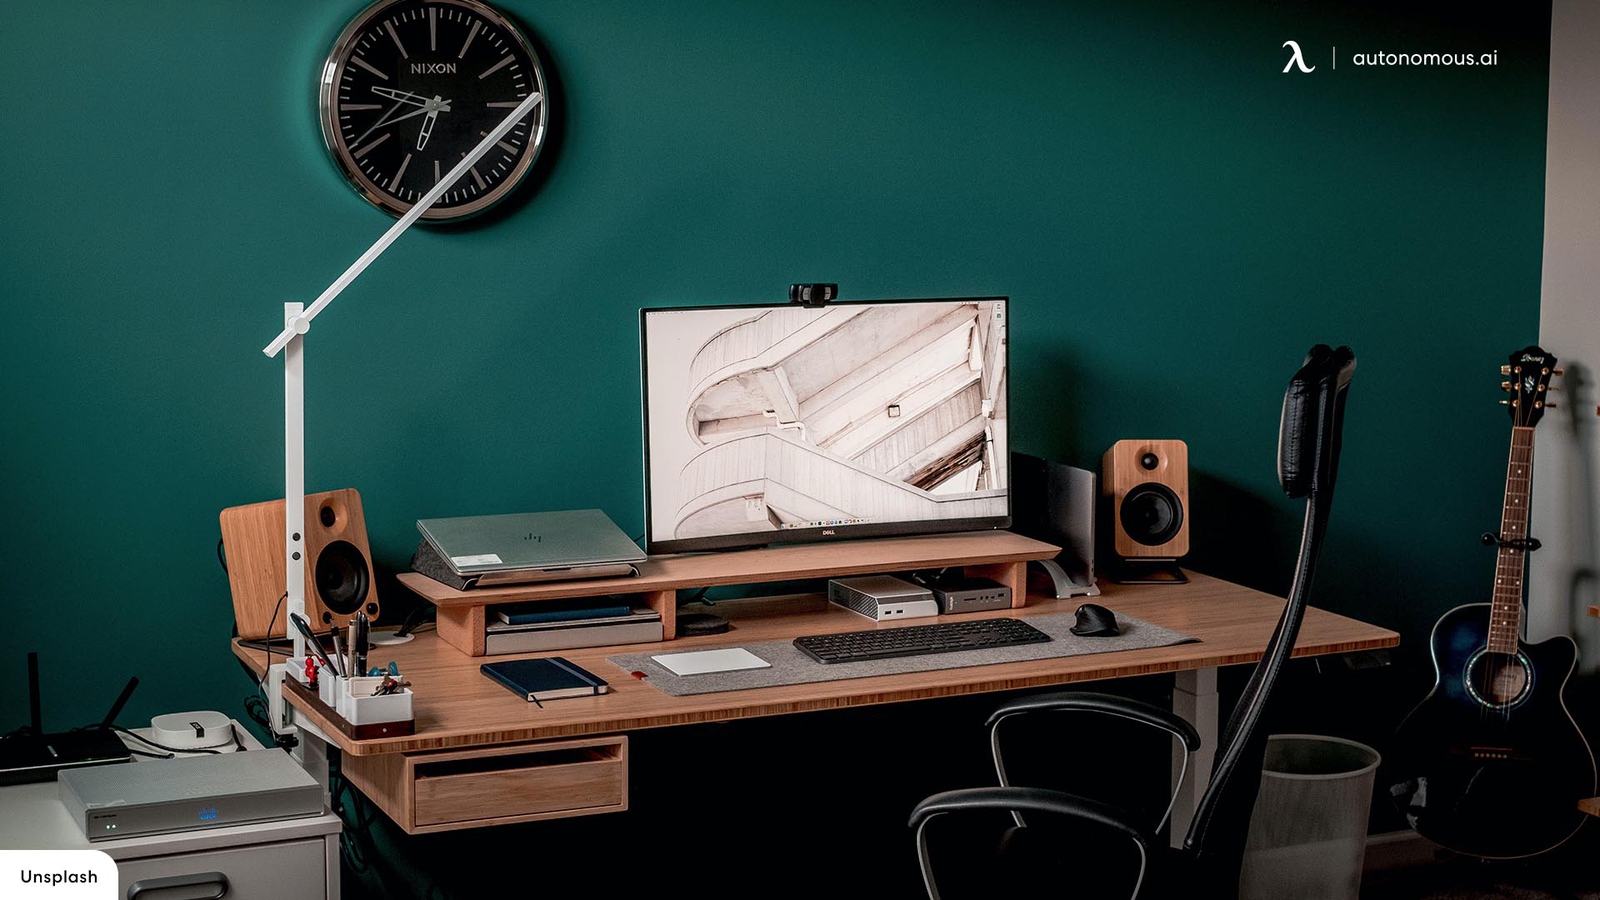 Top 10 Monitor Stands with Organizer to Keep Desk Clean